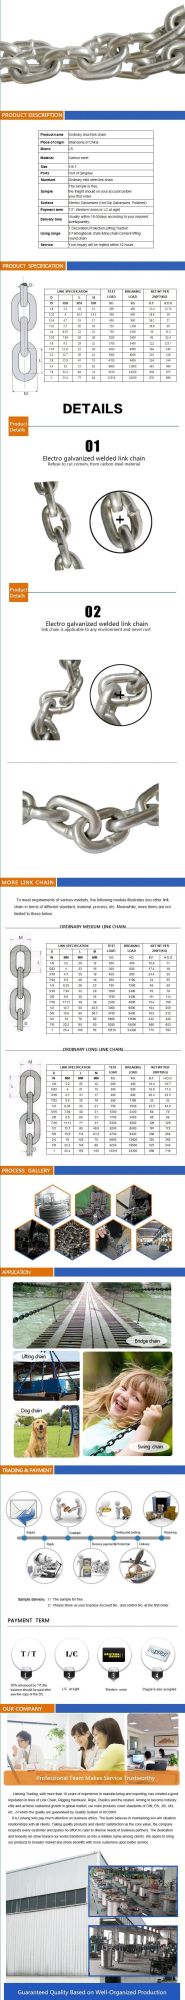 High Quality Welded Iron Carbon Steel Link Chain for Protection